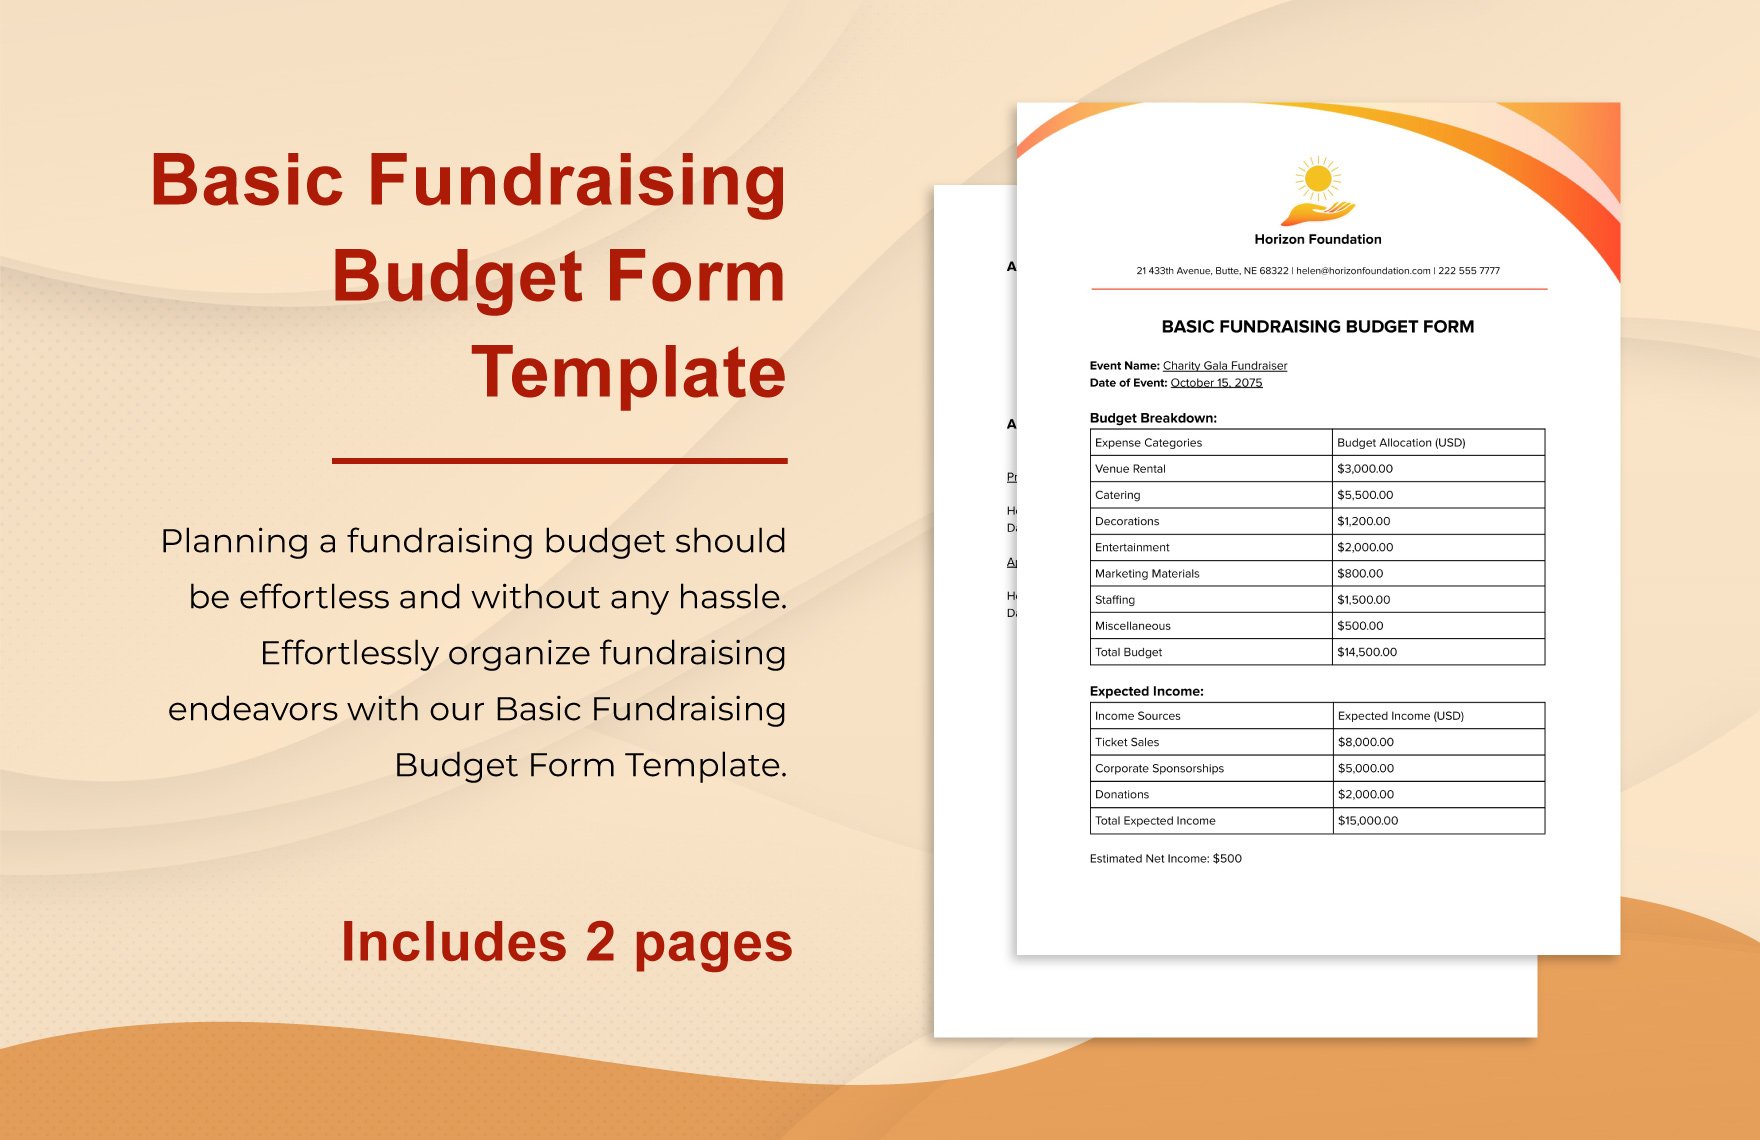 Basic Fundraising Budget Form Template